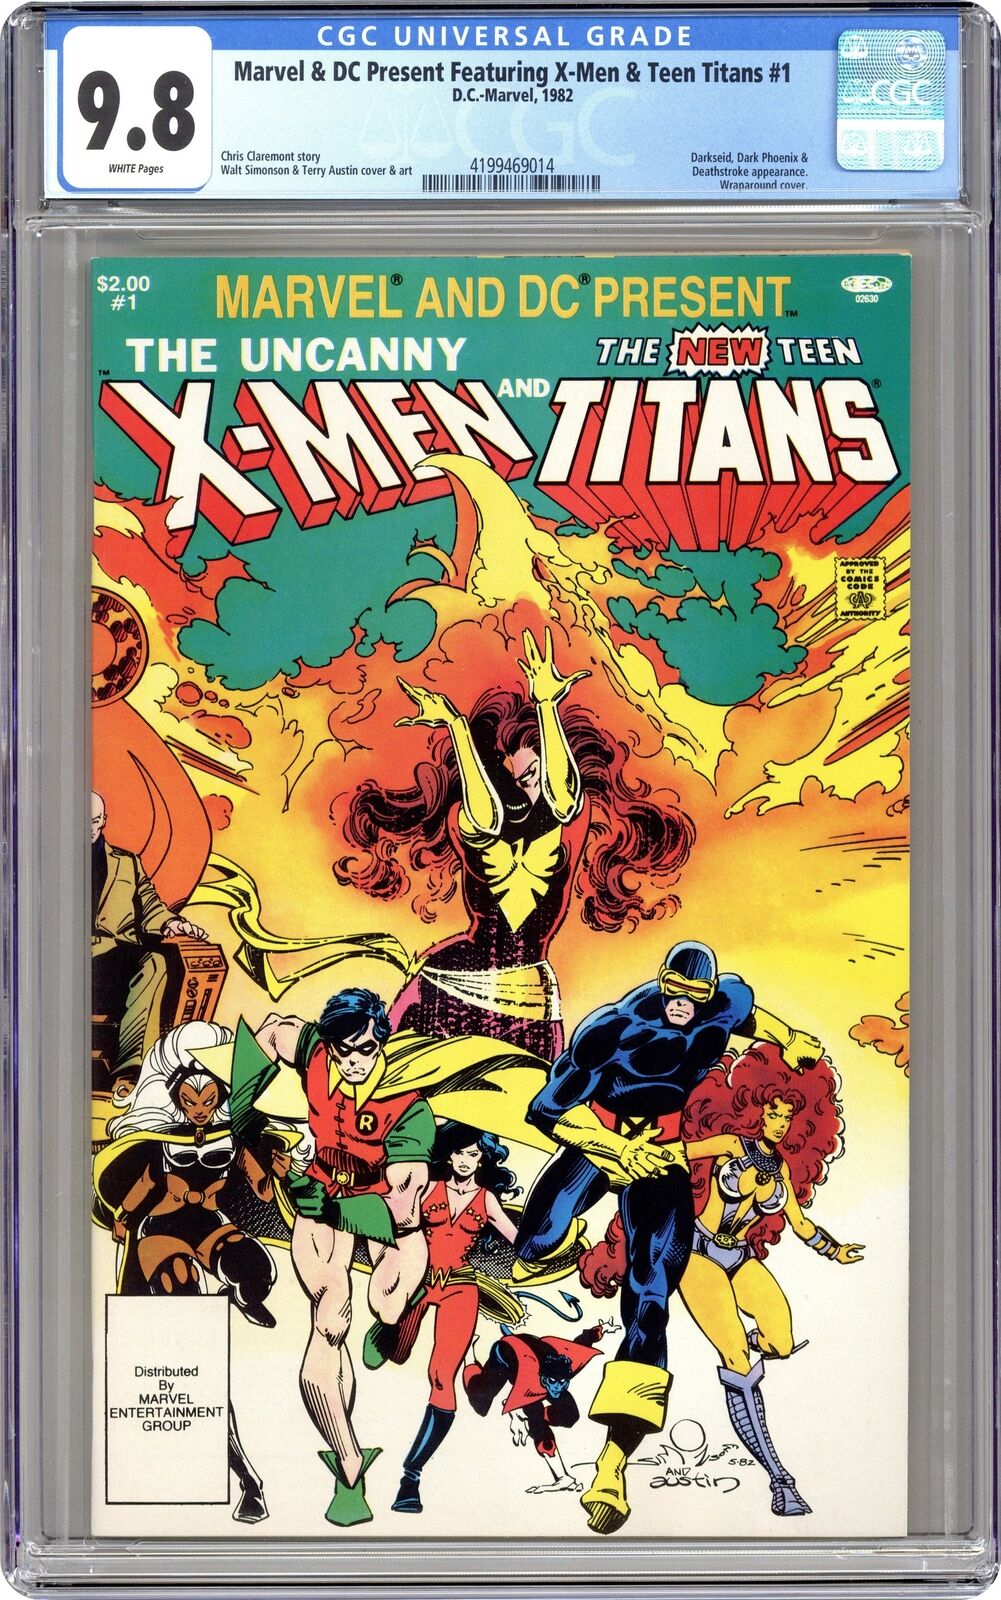 Marvel and DC Present the Uncanny X-Men and the New Teen Titans #1 CGC 9.8 1982